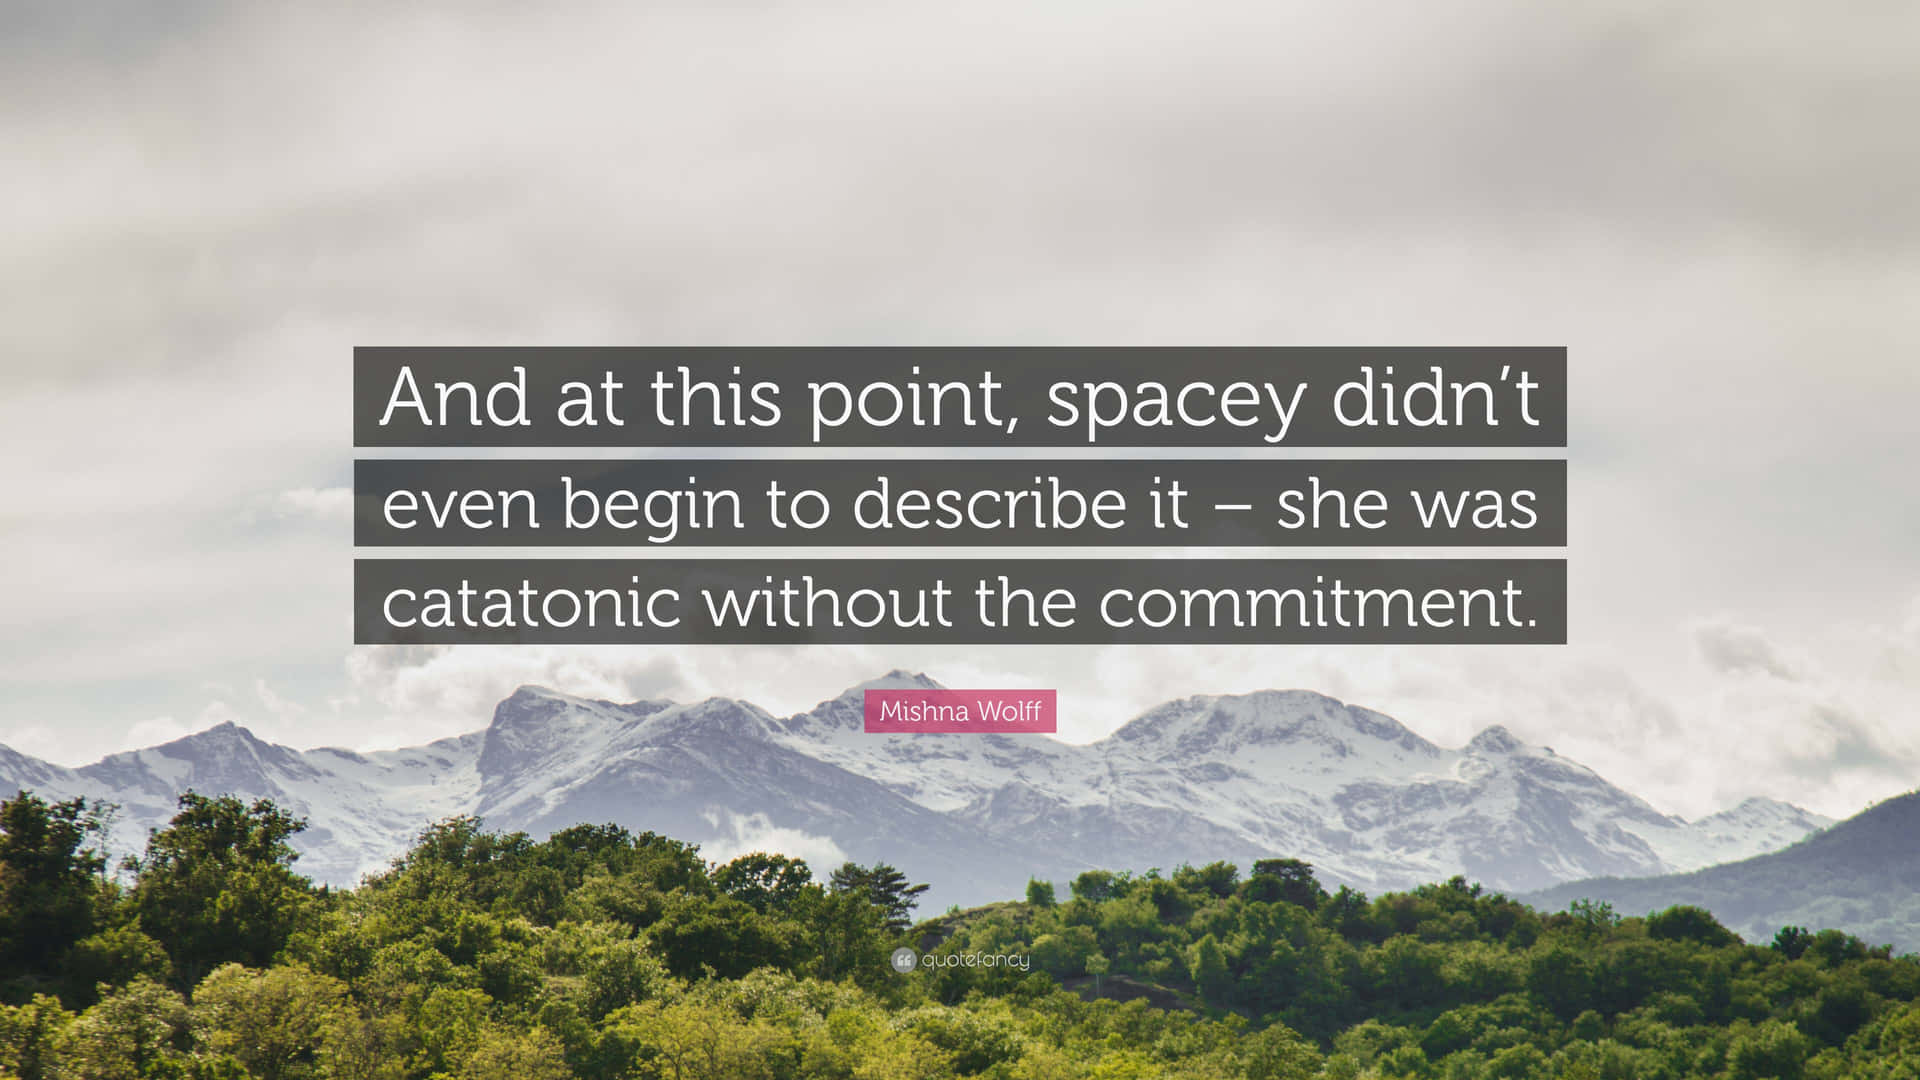 A Quote About Space And This Point Space Didn't Even Begin To Describe It She Catalytic Background